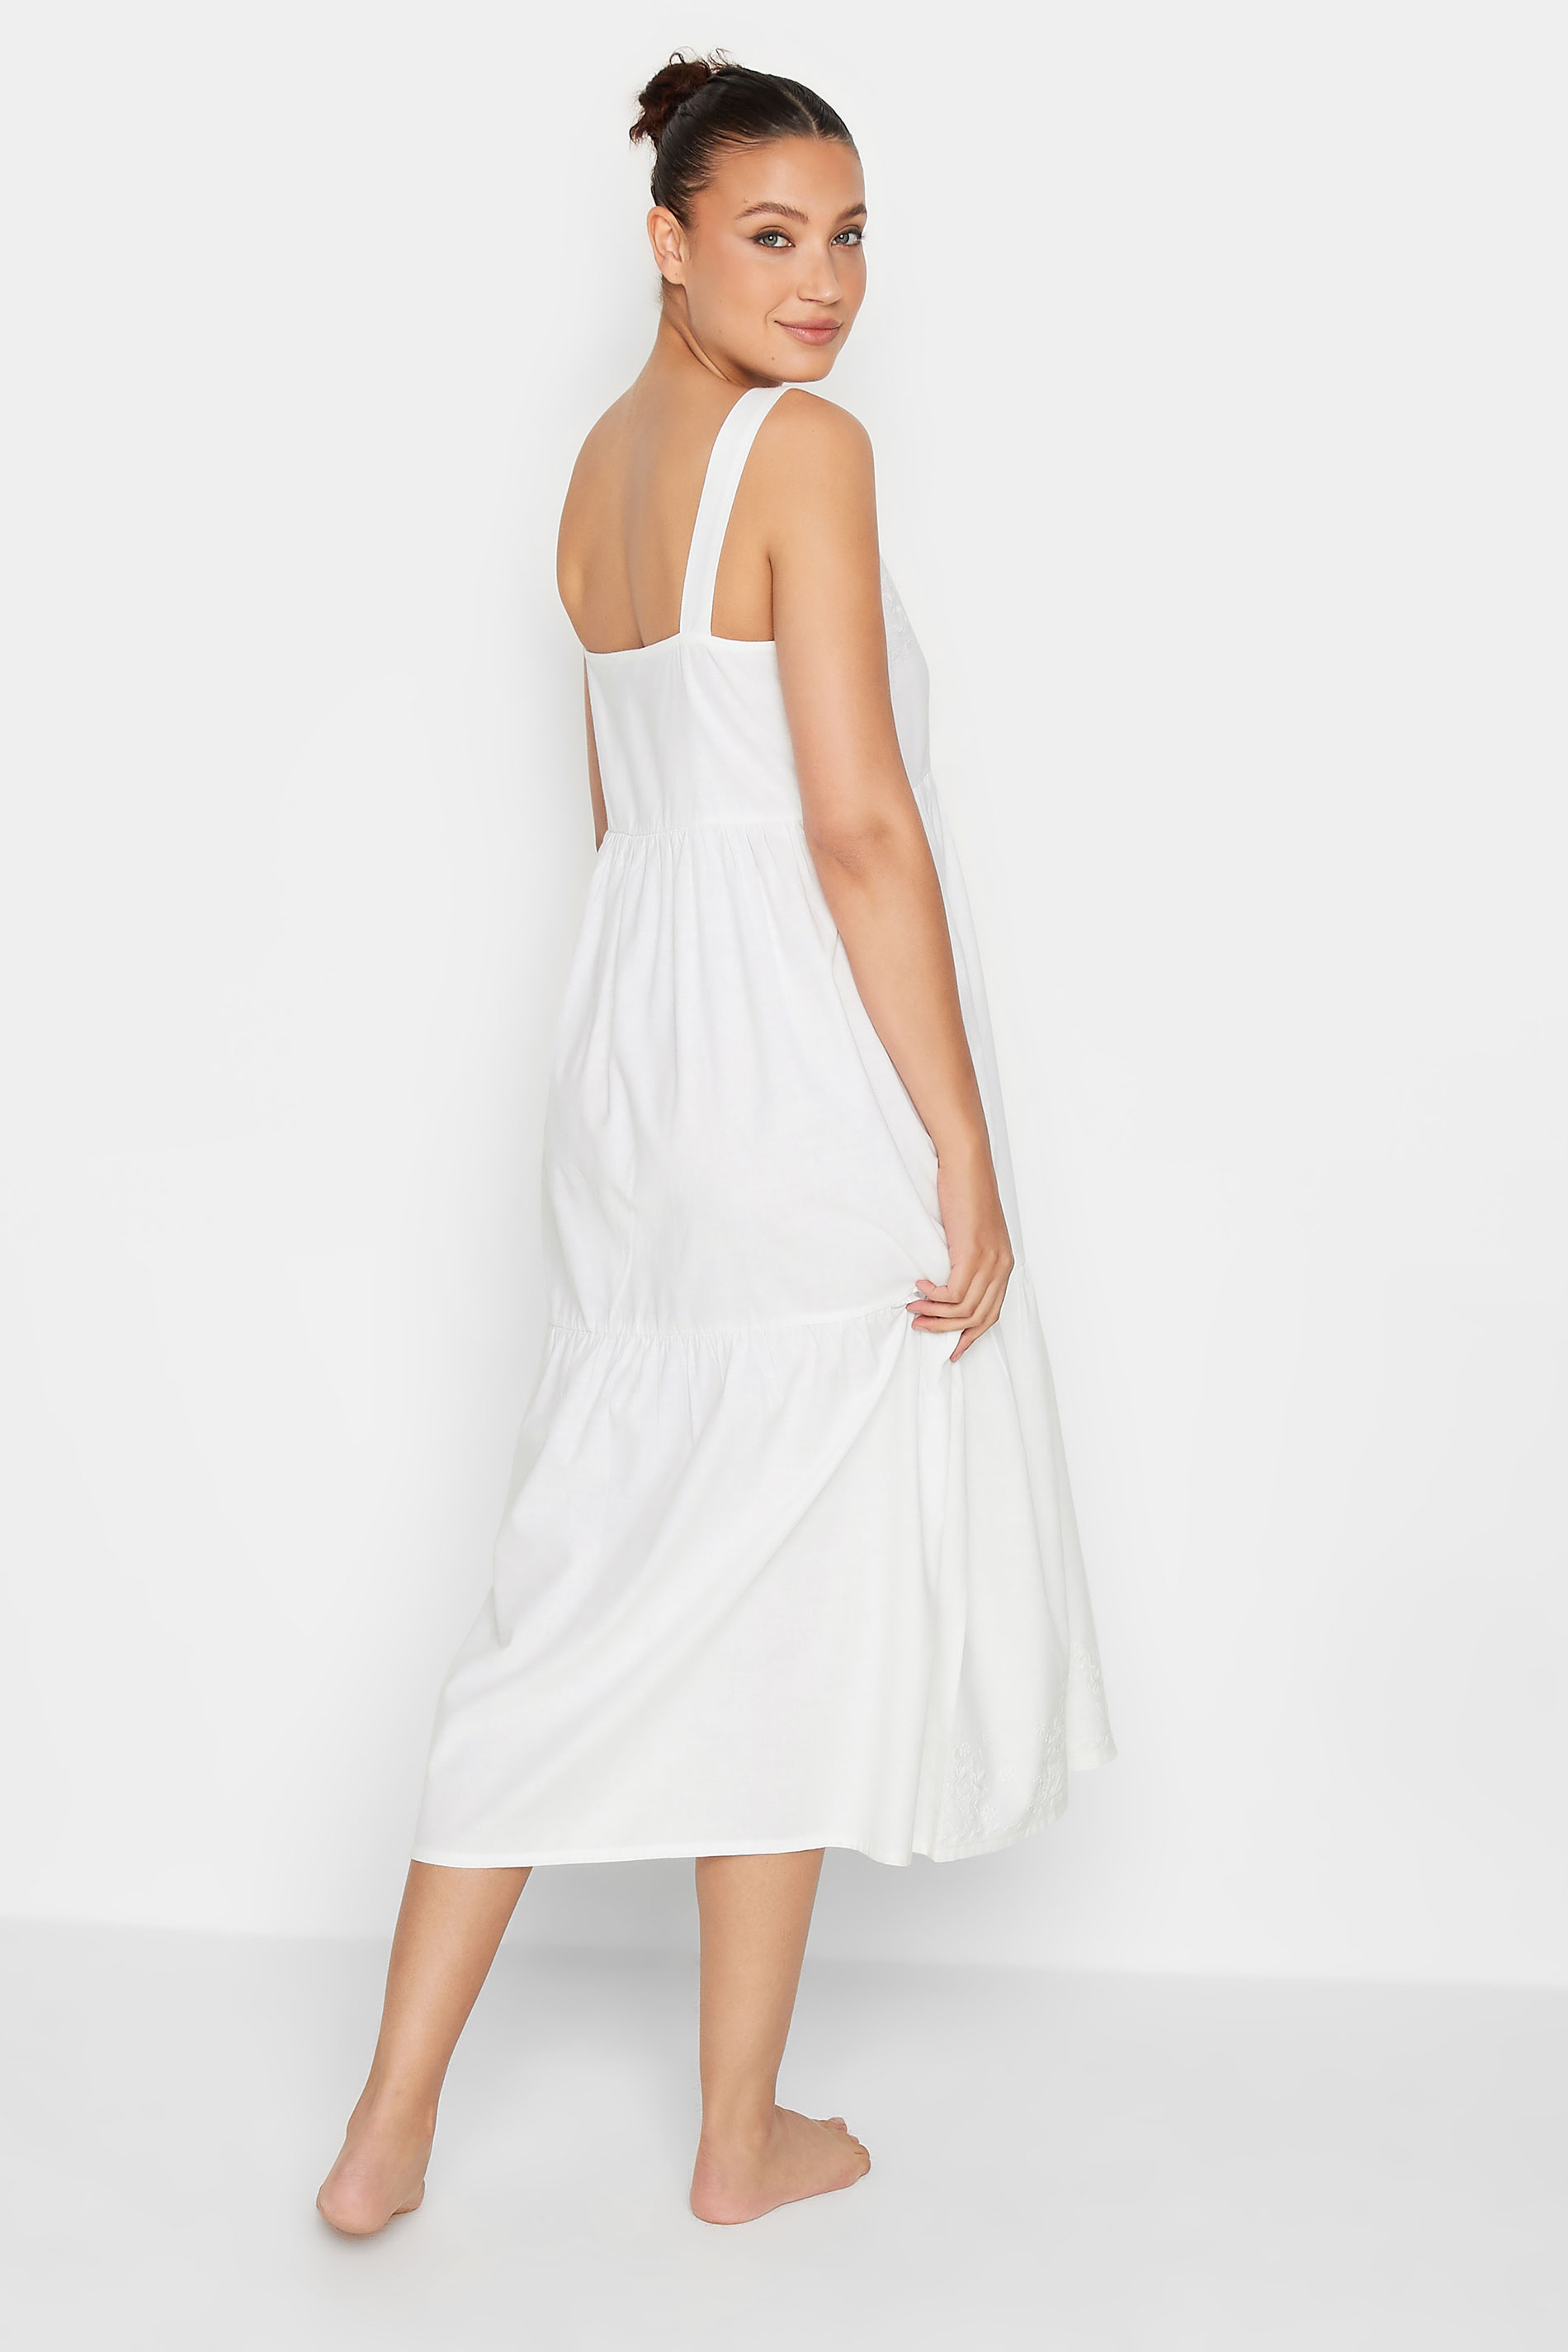 LTS Tall Women's White Embroidered Nightdress | Long Tall Sally 3